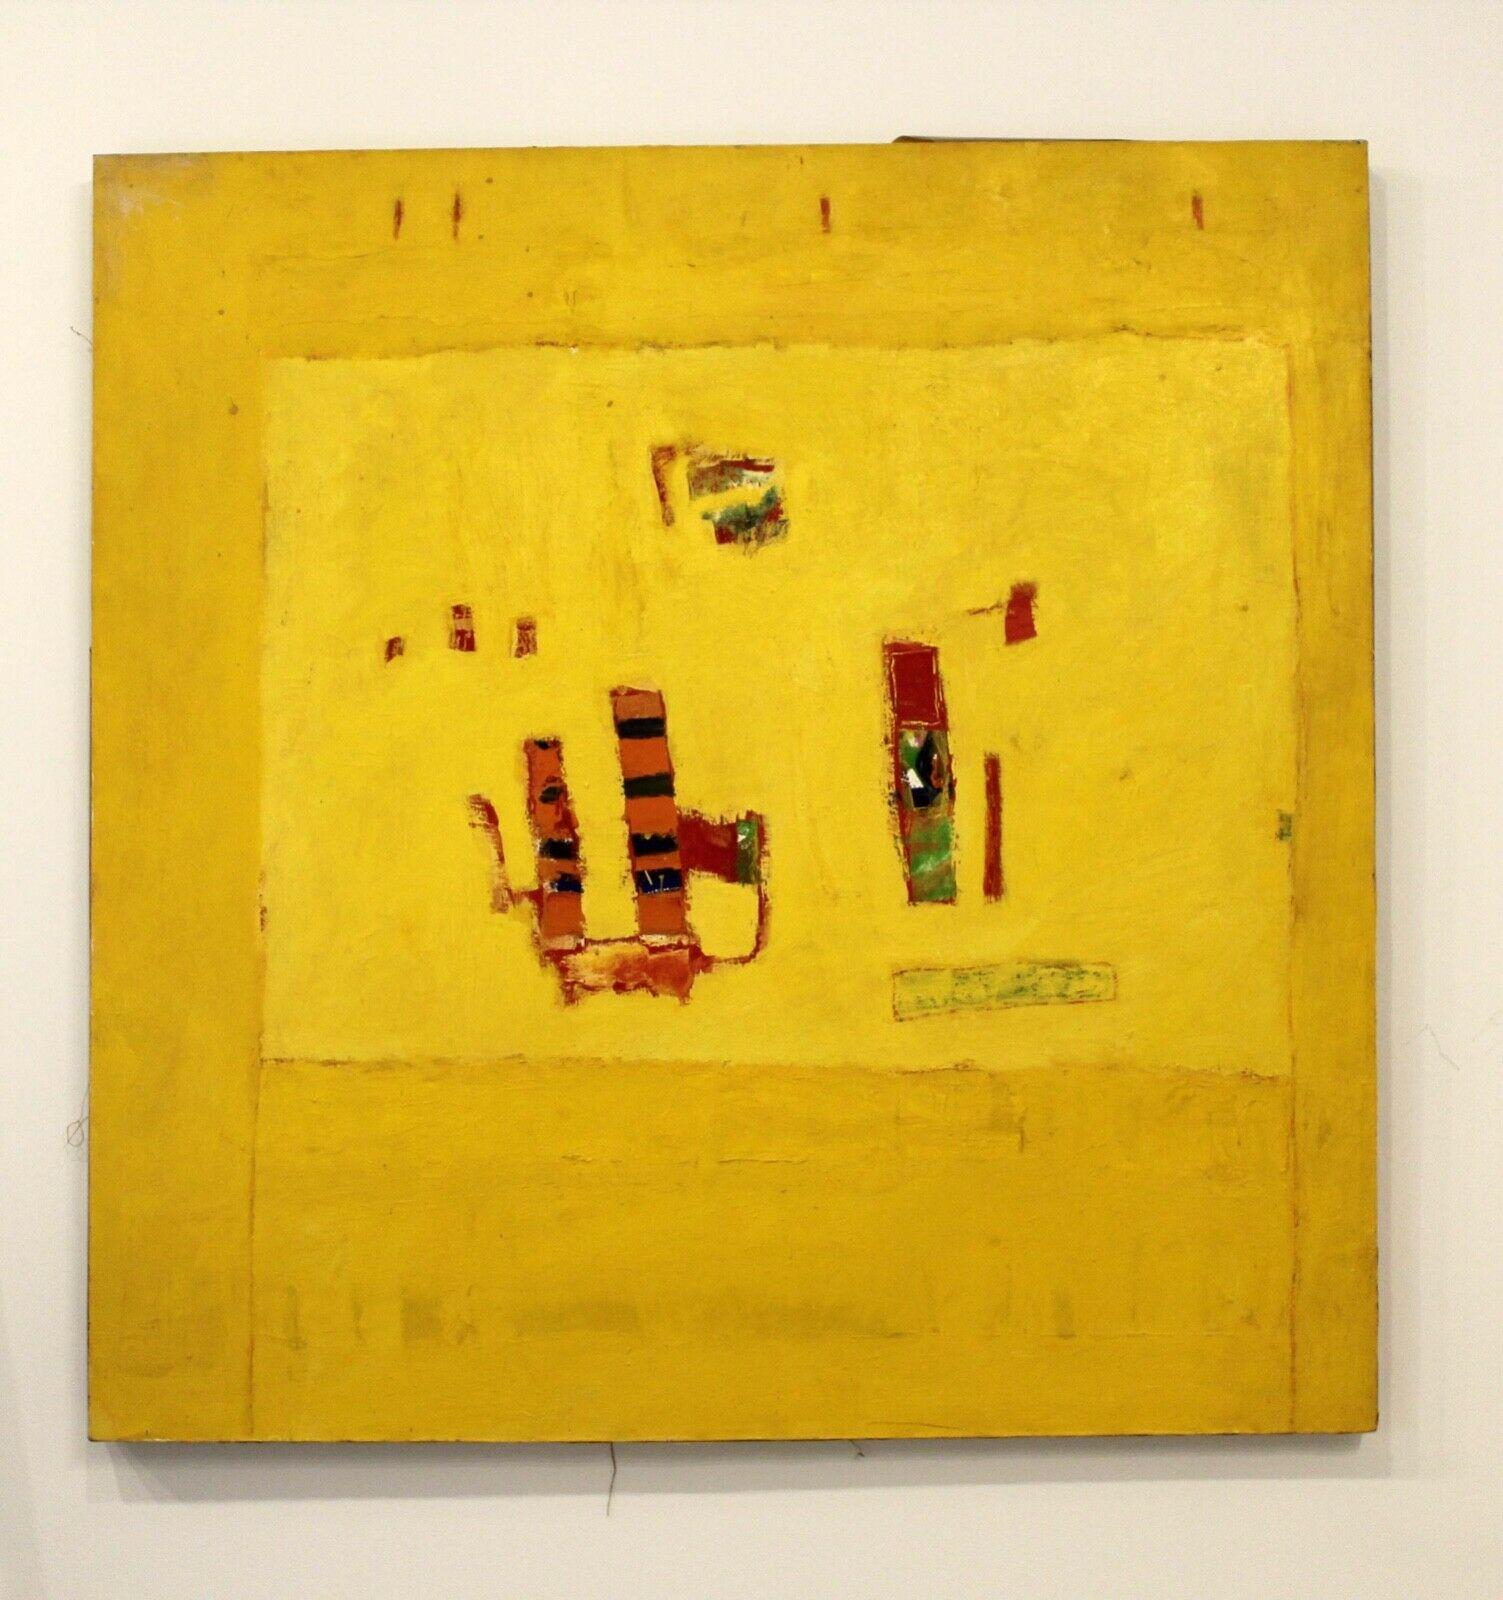 Showstopper! This vivid yellow work was painted by Oka Doner while she was studying art at The University of Michigan.The airy and radiant yellow painting gives the viewer the feeling that all is okay with the world. Heightening this sensation is